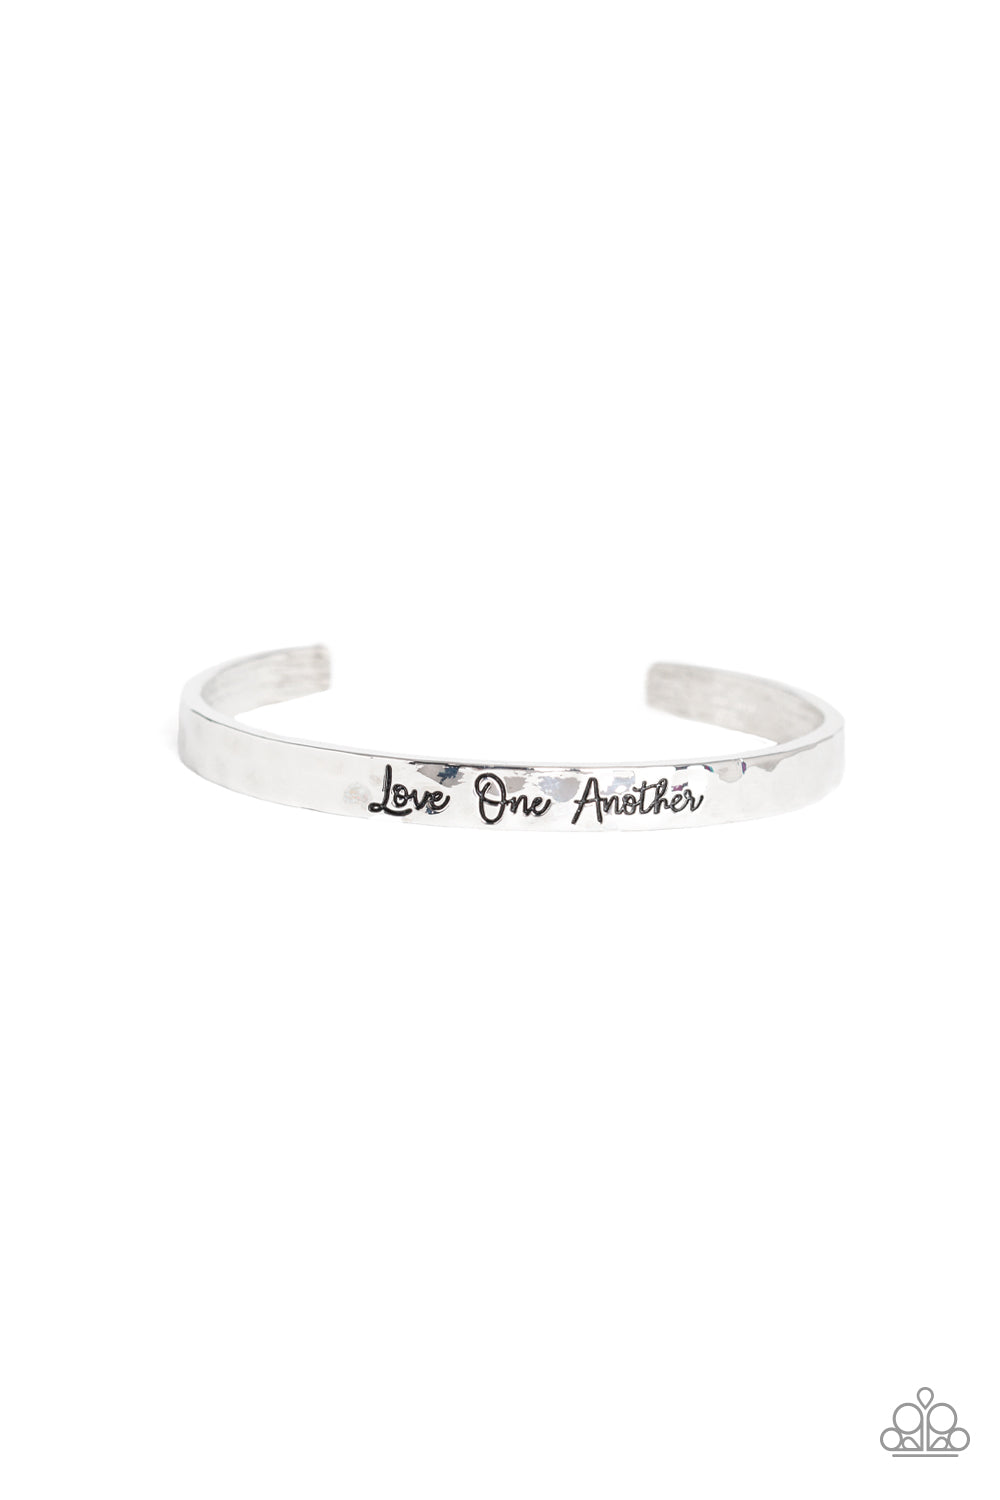 Love One Another Silver Paparazzi Bracelets Cashmere Pink Jewels - Cashmere Pink Jewels & Accessories, Cashmere Pink Jewels & Accessories - Paparazzi